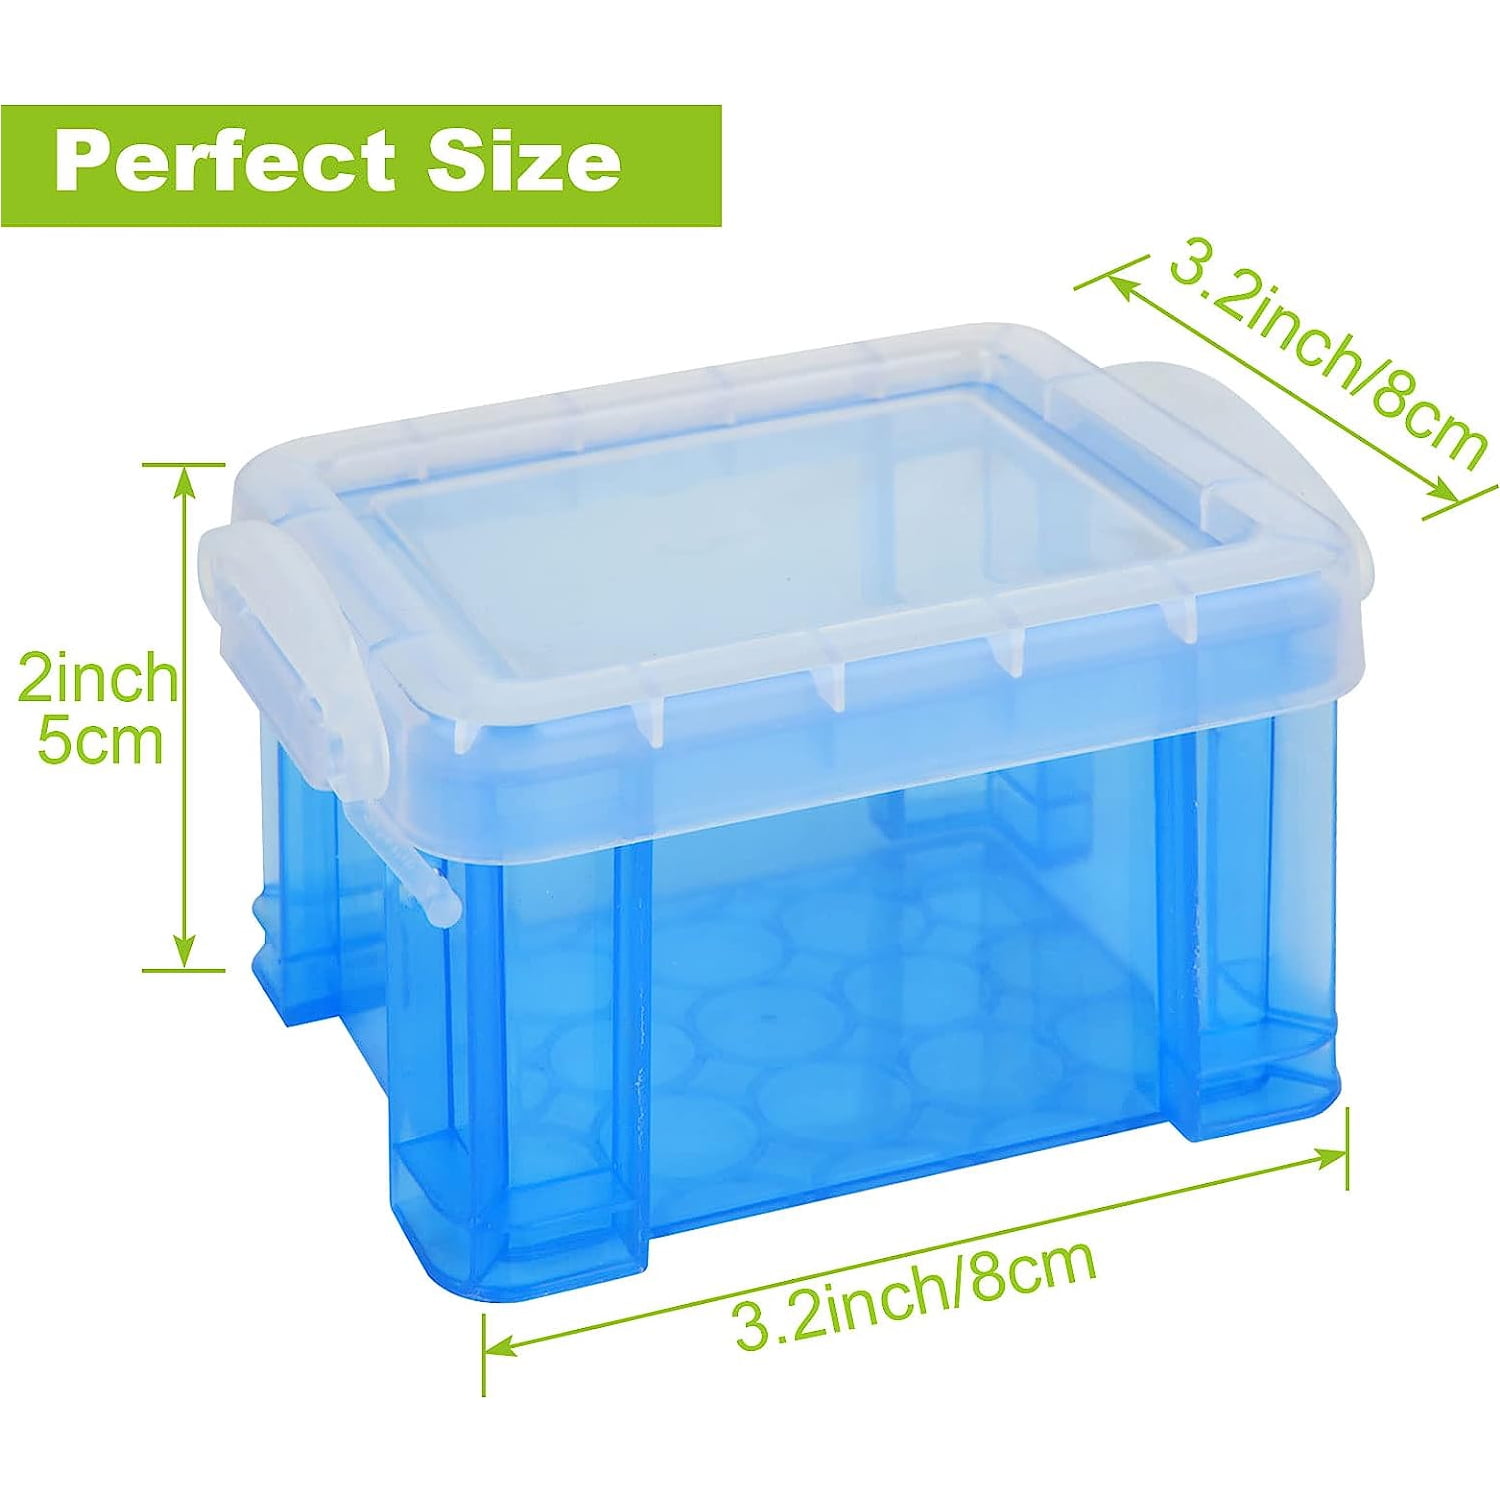 Nicunom 8 Packs Small Storage Bins with Lids, 3.2 QT Clear Storage Latch  Box Plastic Storage Bins Stackable Storage Containers for Organizing